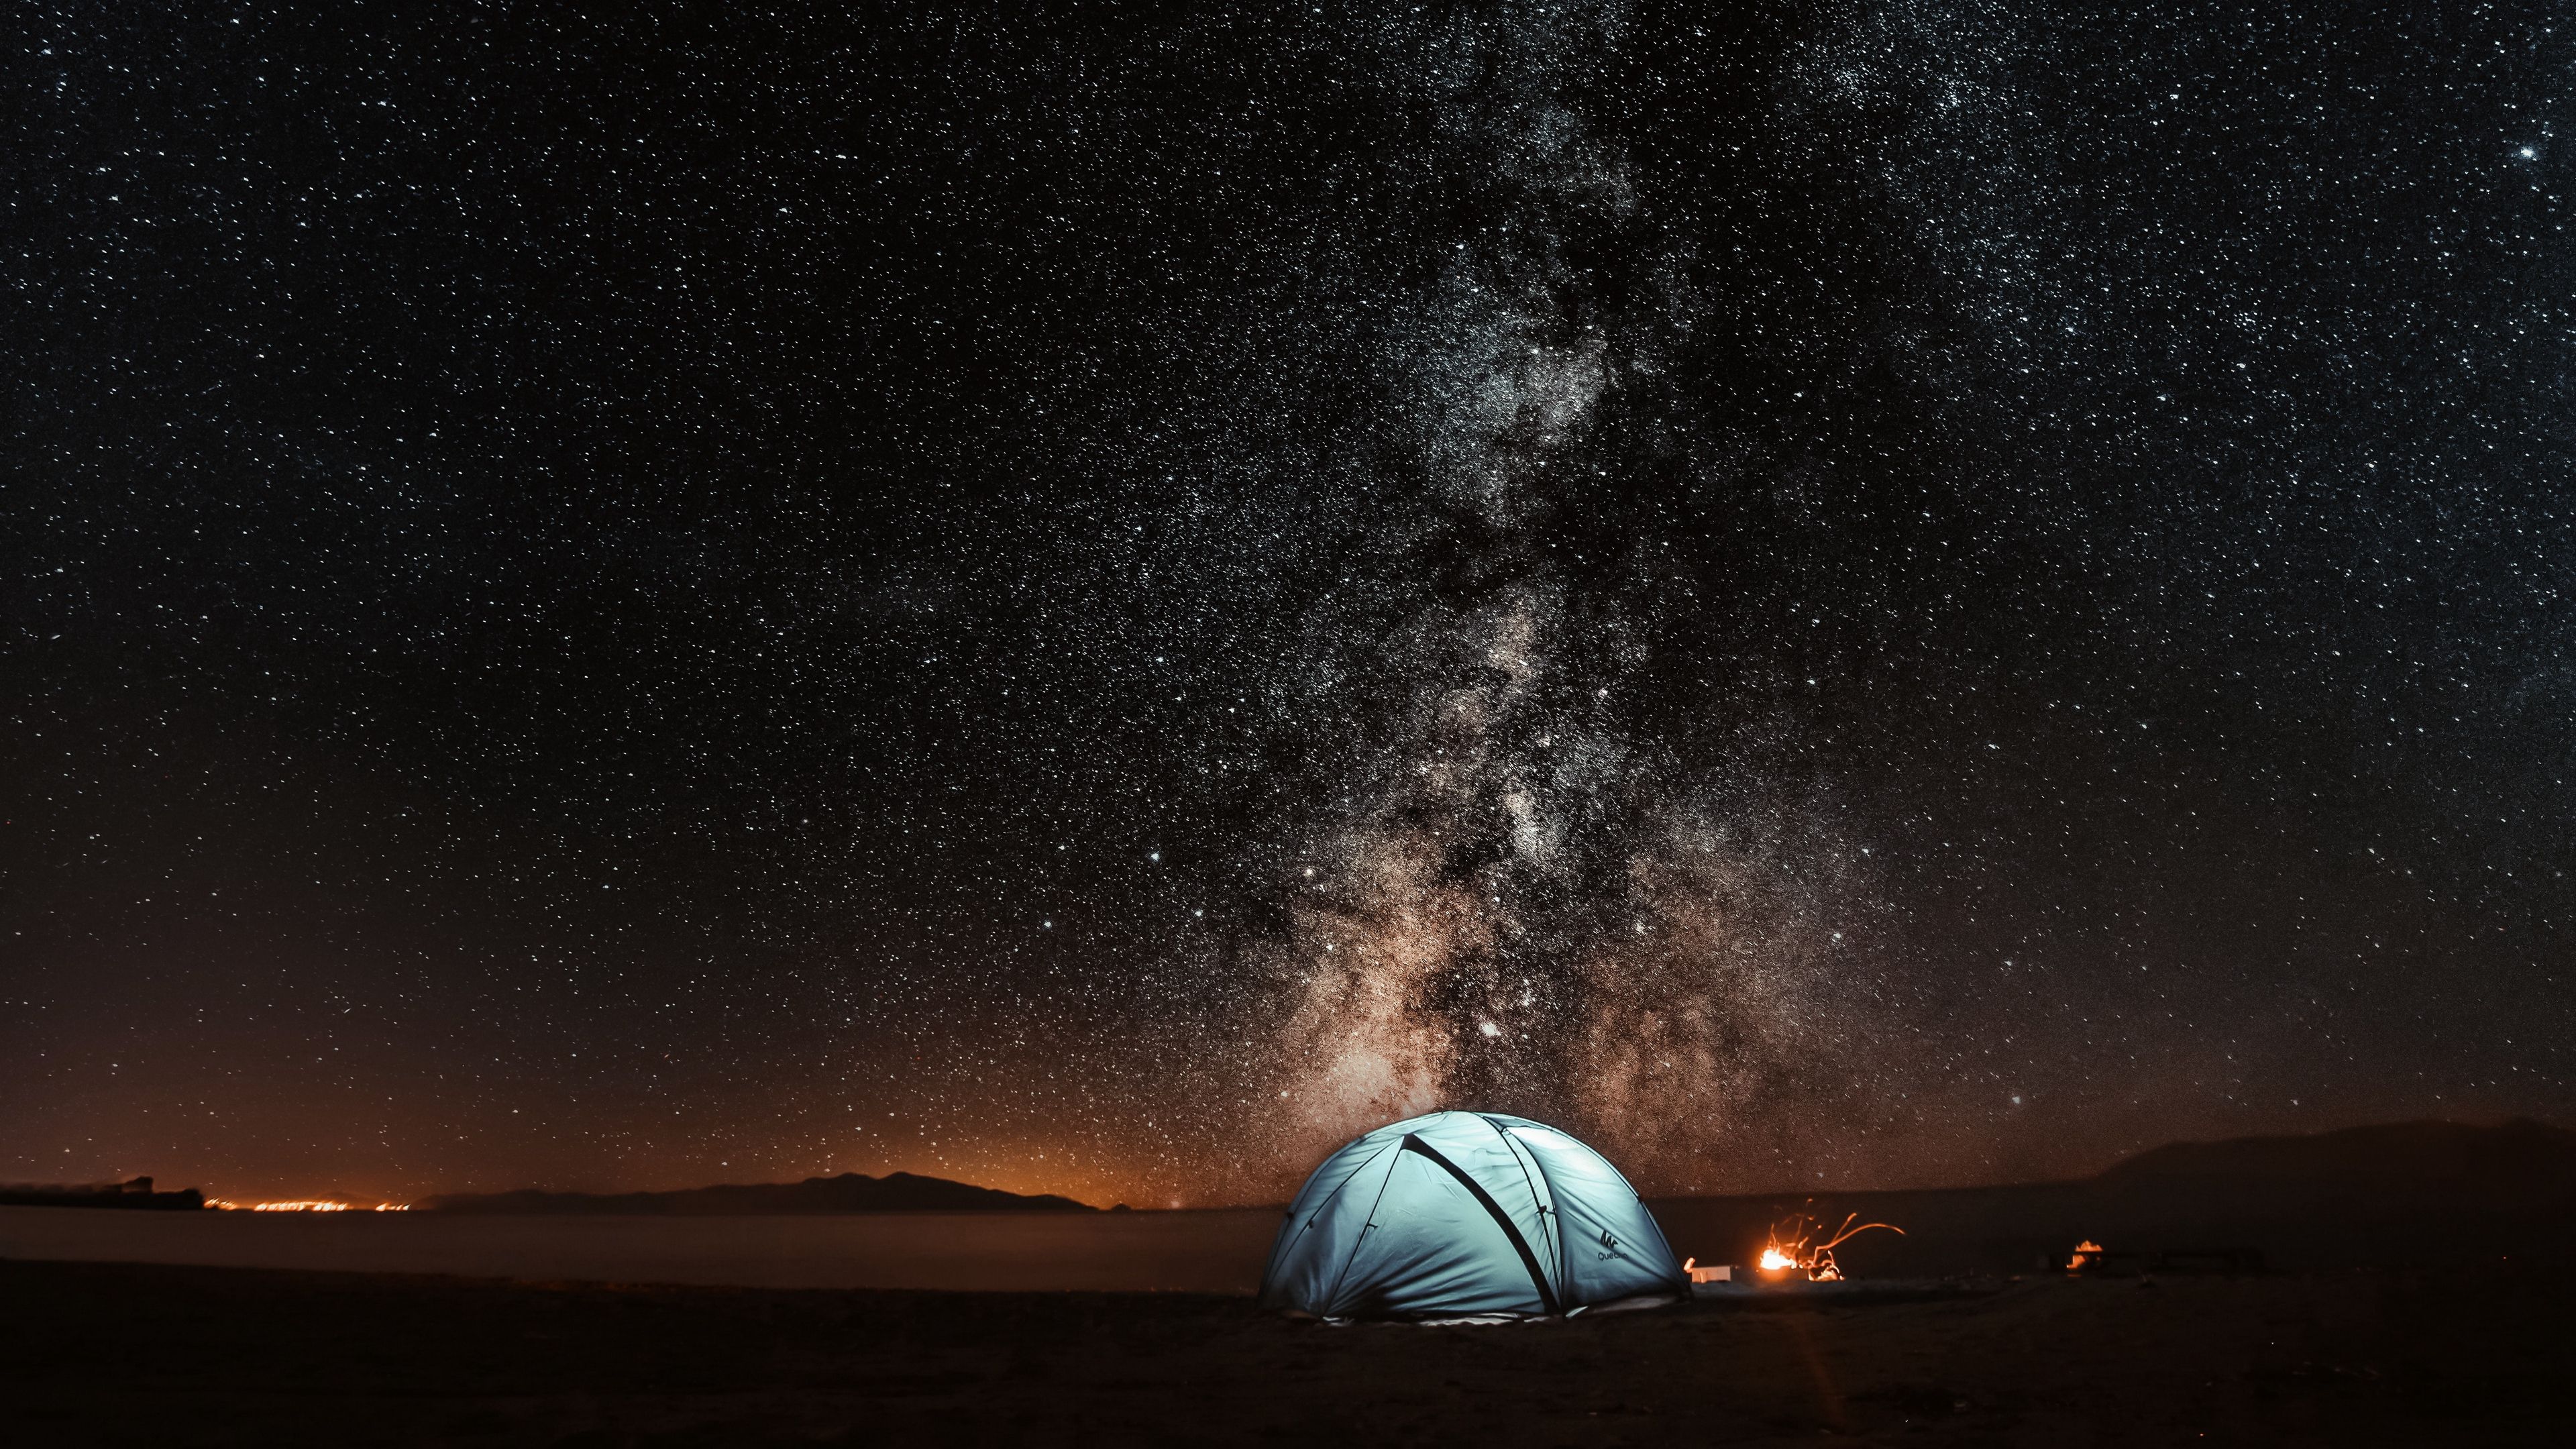 Tent 4K wallpaper for your desktop or mobile screen free and easy to download